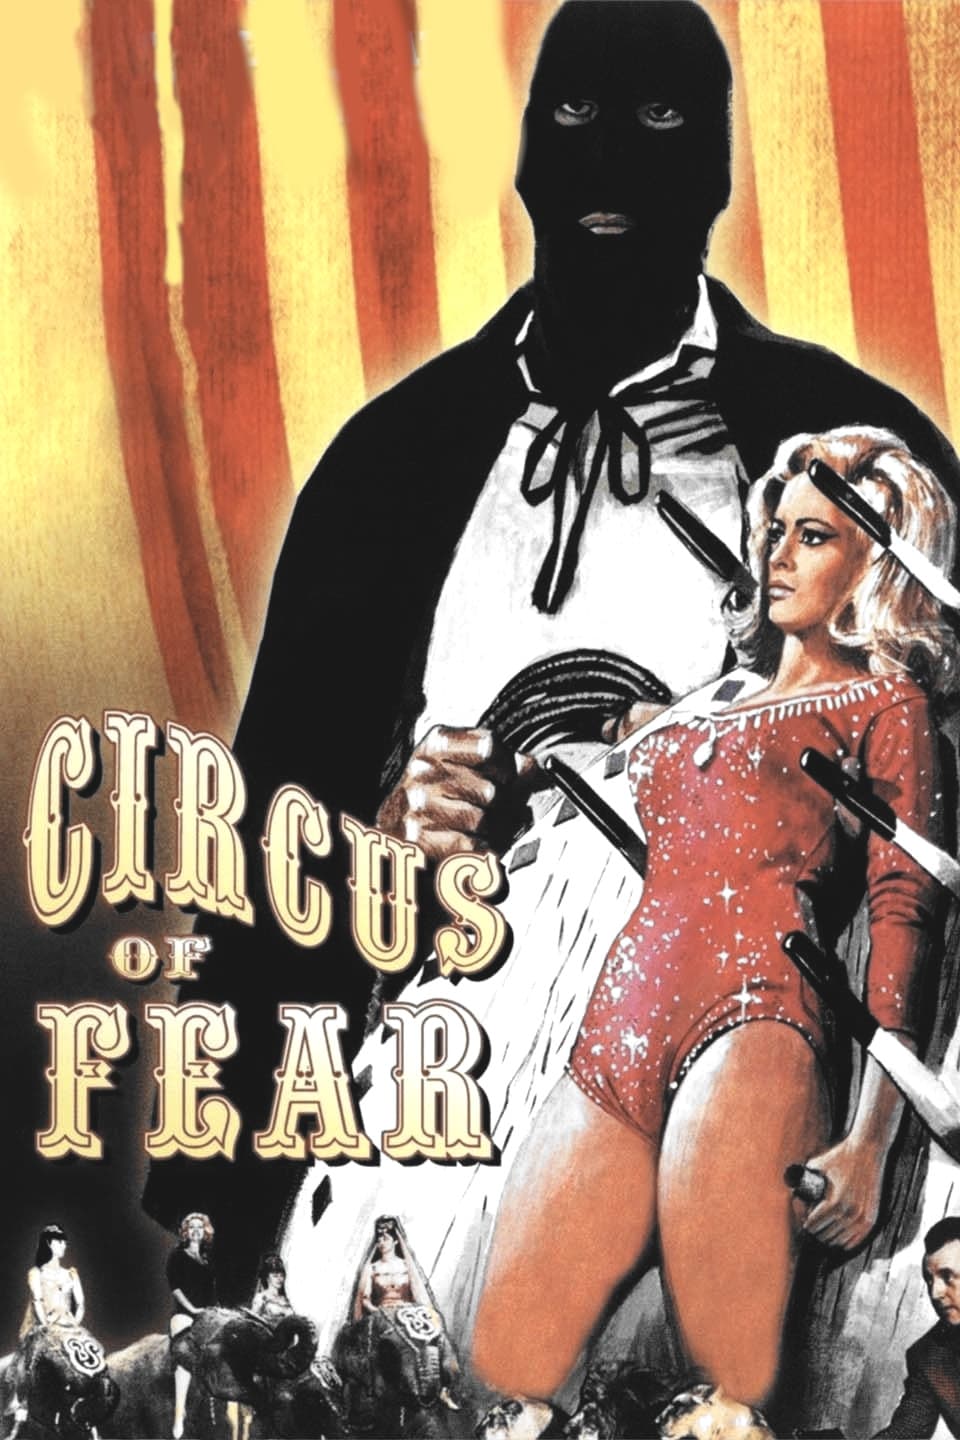 Circus of Fear (1966)